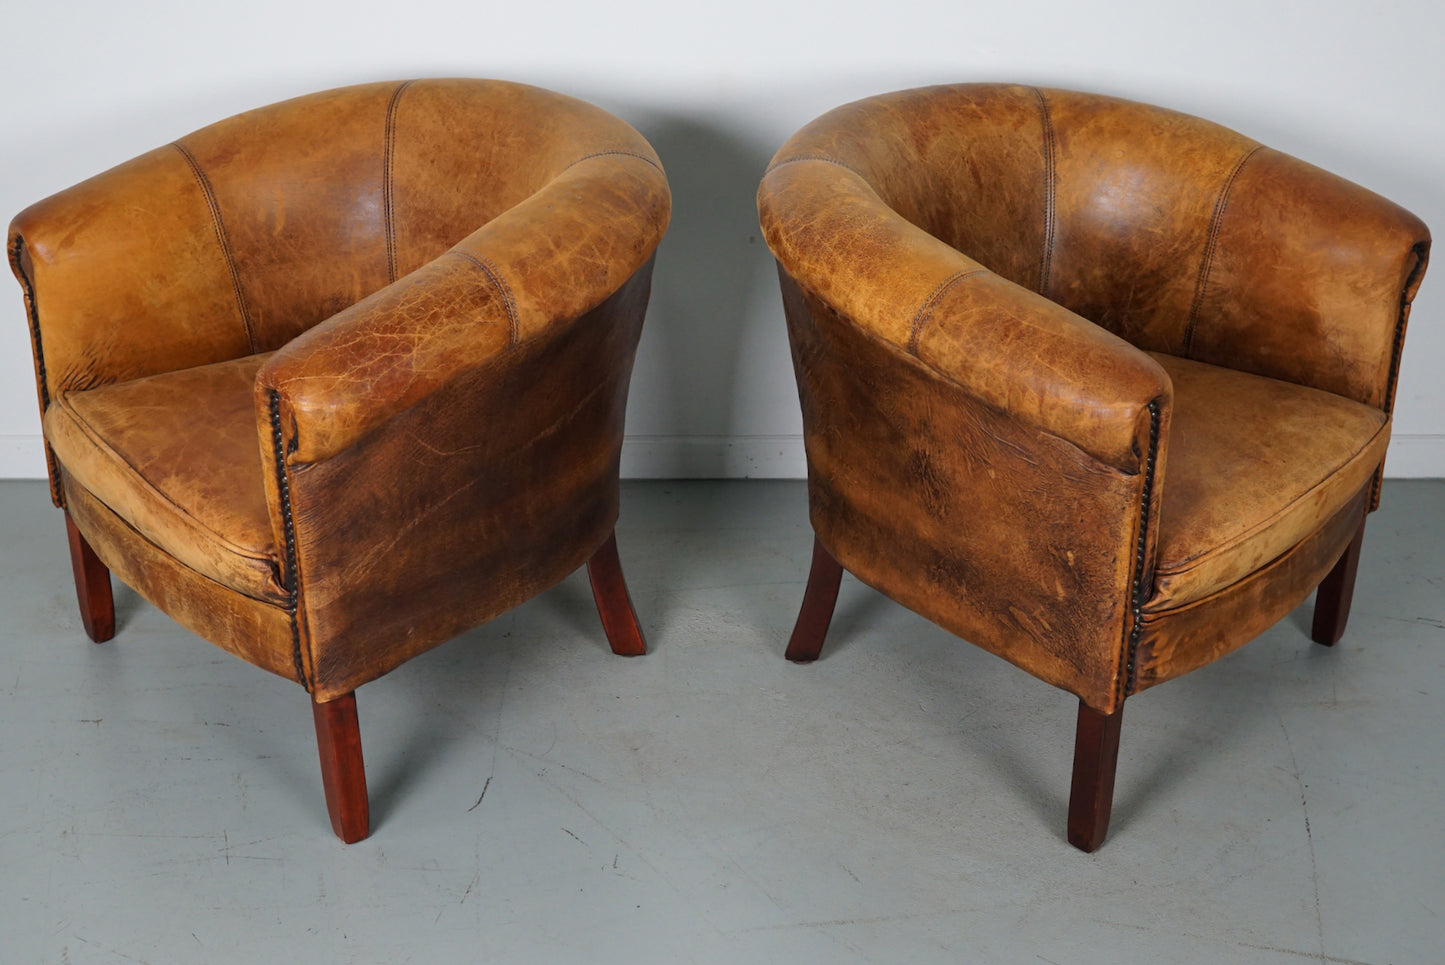 Vintage Dutch Cognac Colored Leather Club Chair, Set of 2 with Footstools